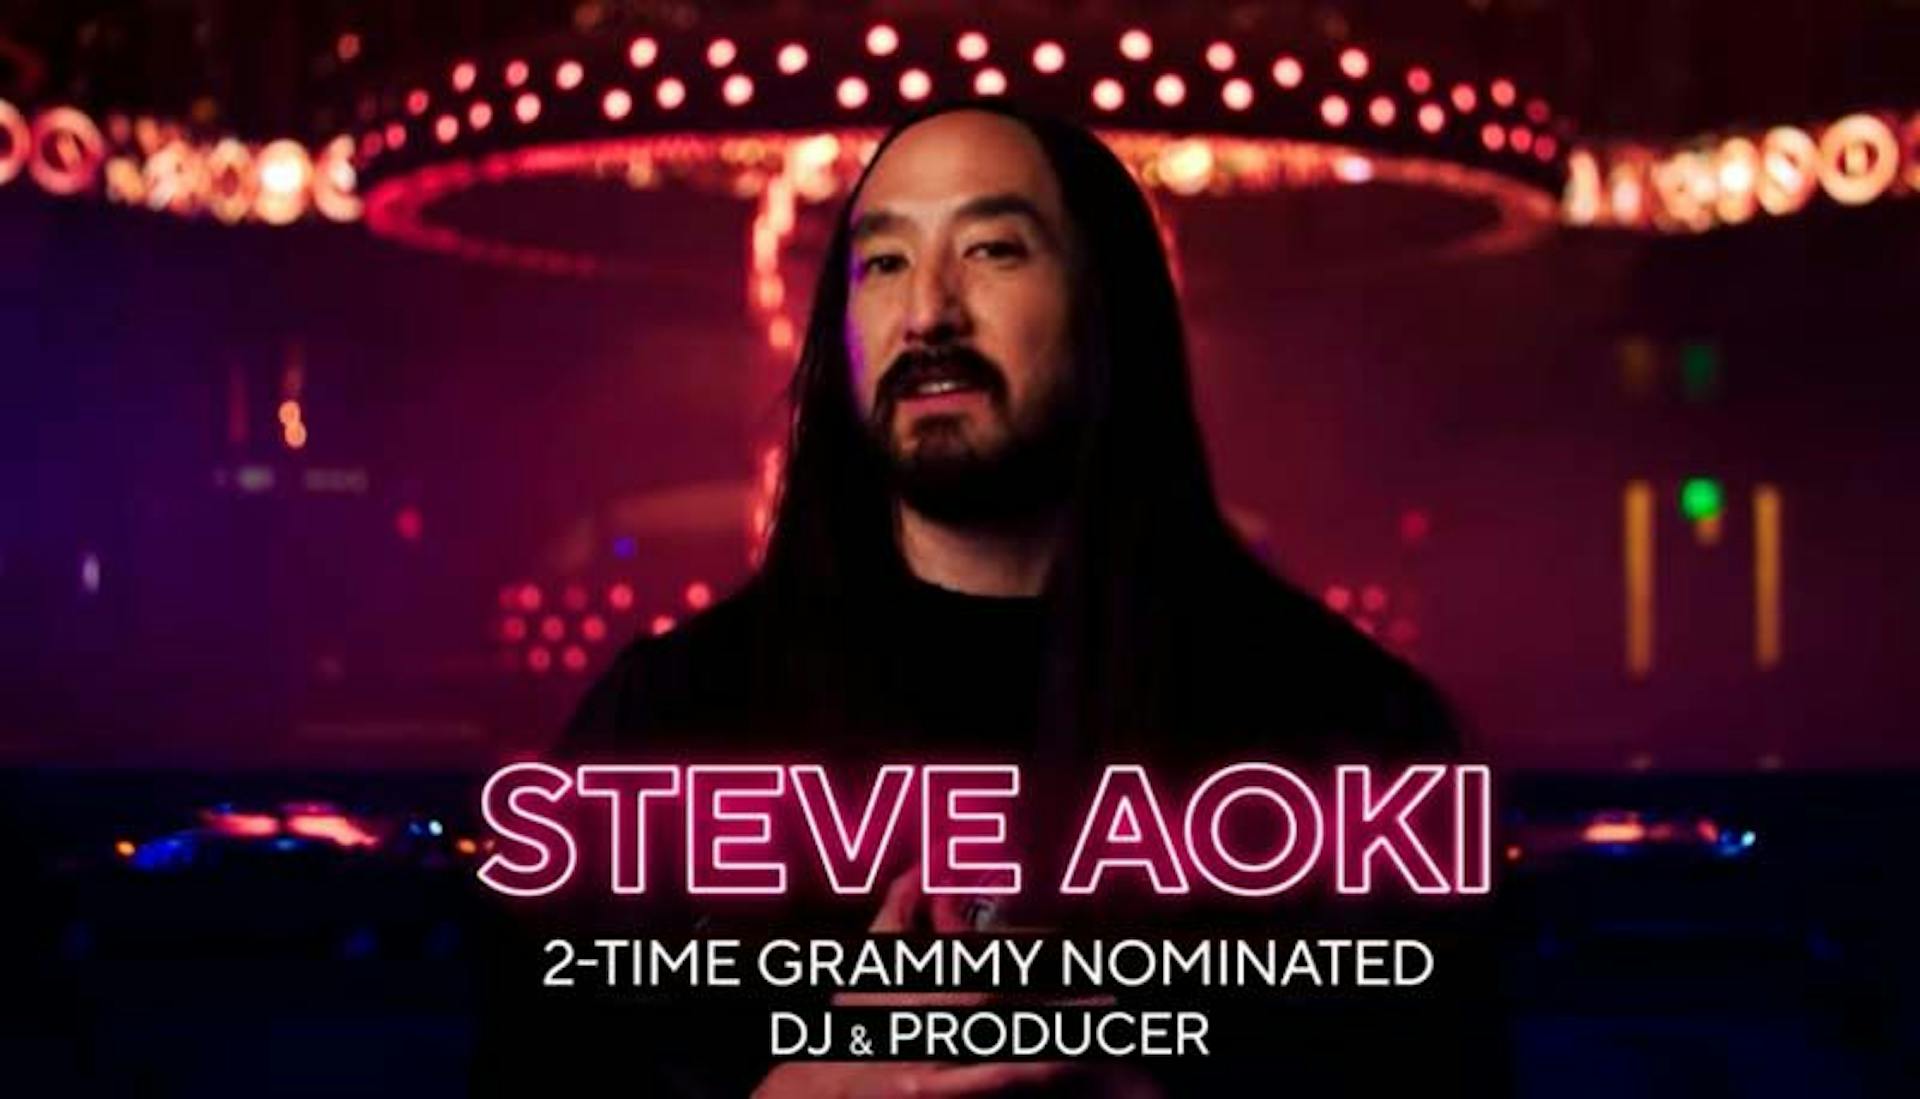 Aoki has finally found the key to a music fortune: NFTs